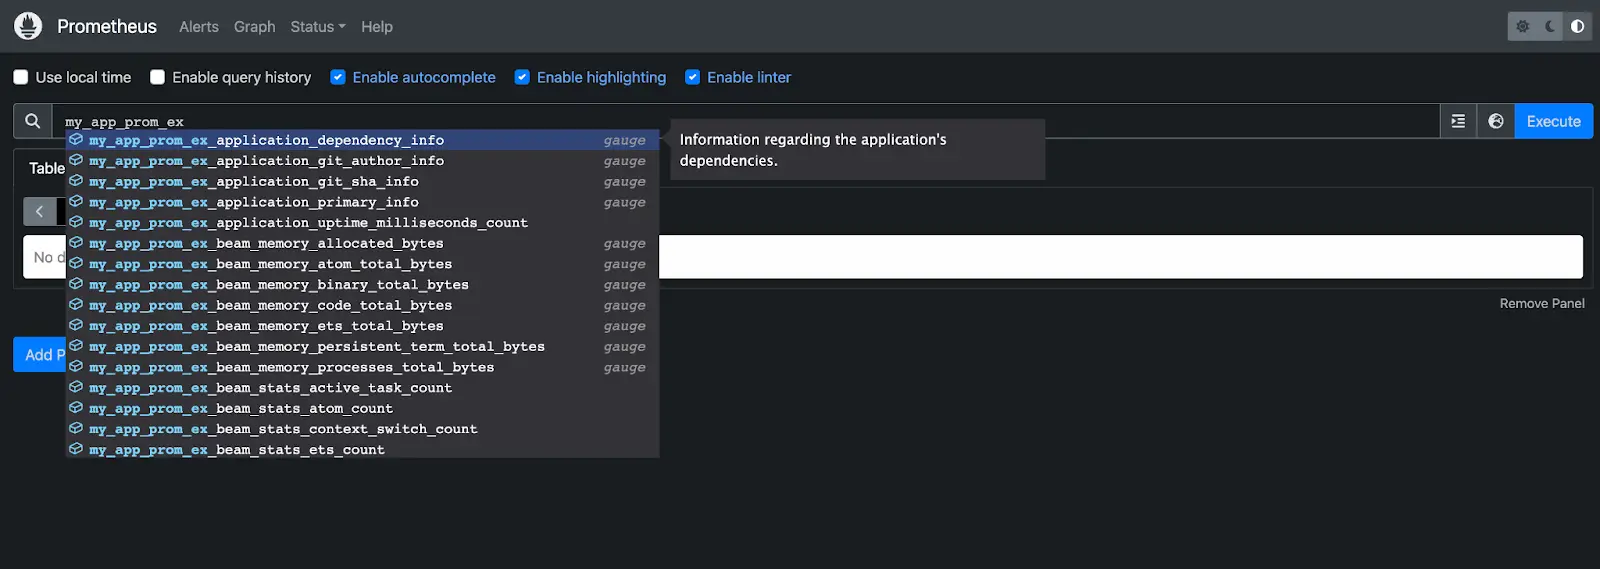 A screen showing a prometheus page with a dropdown list of available metrics